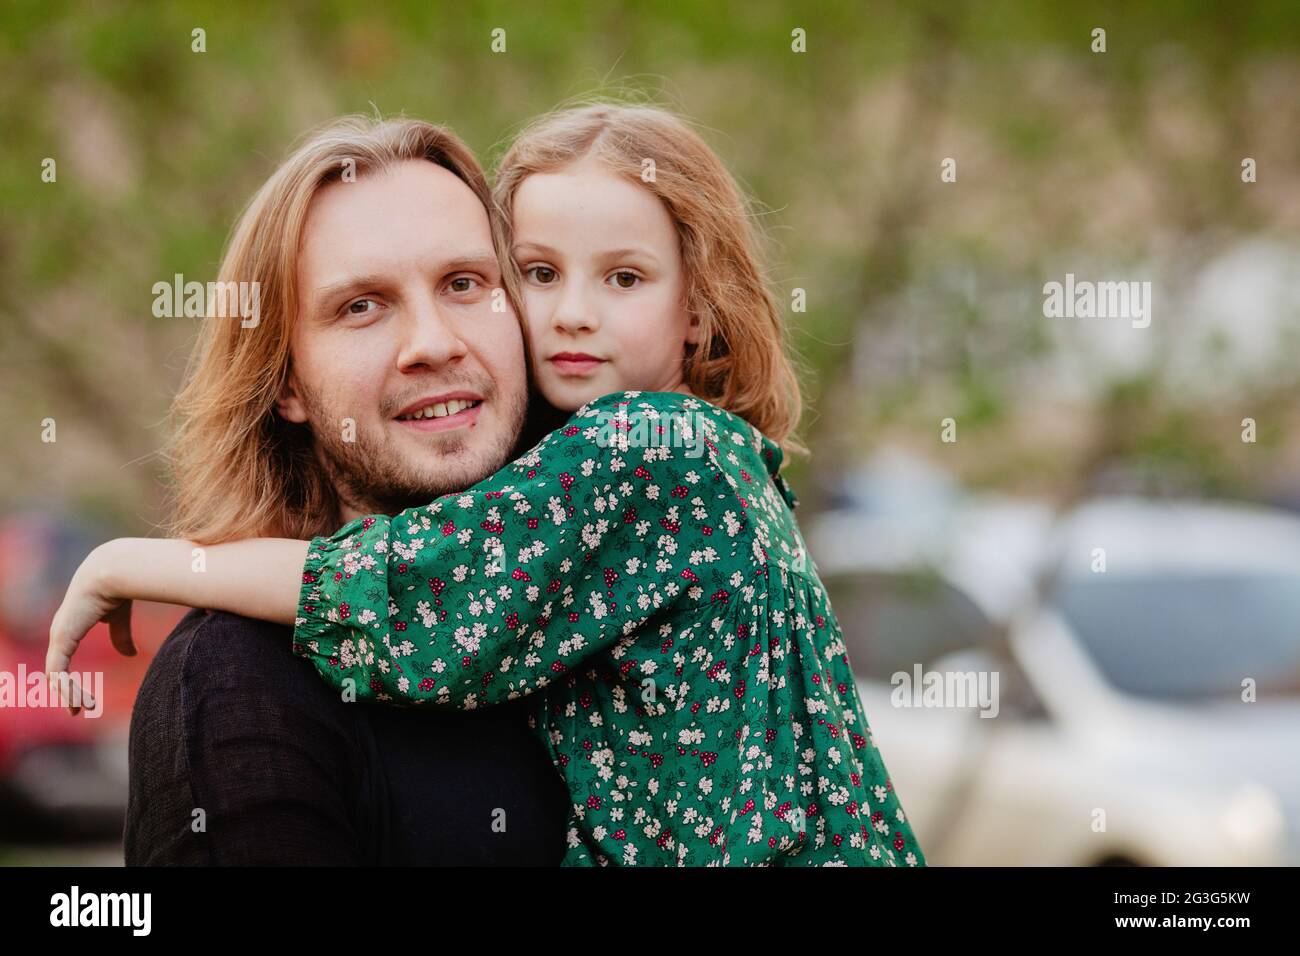 Cute girl gently hugging sliming father in city and looking at camera on blurred background Stock Photo